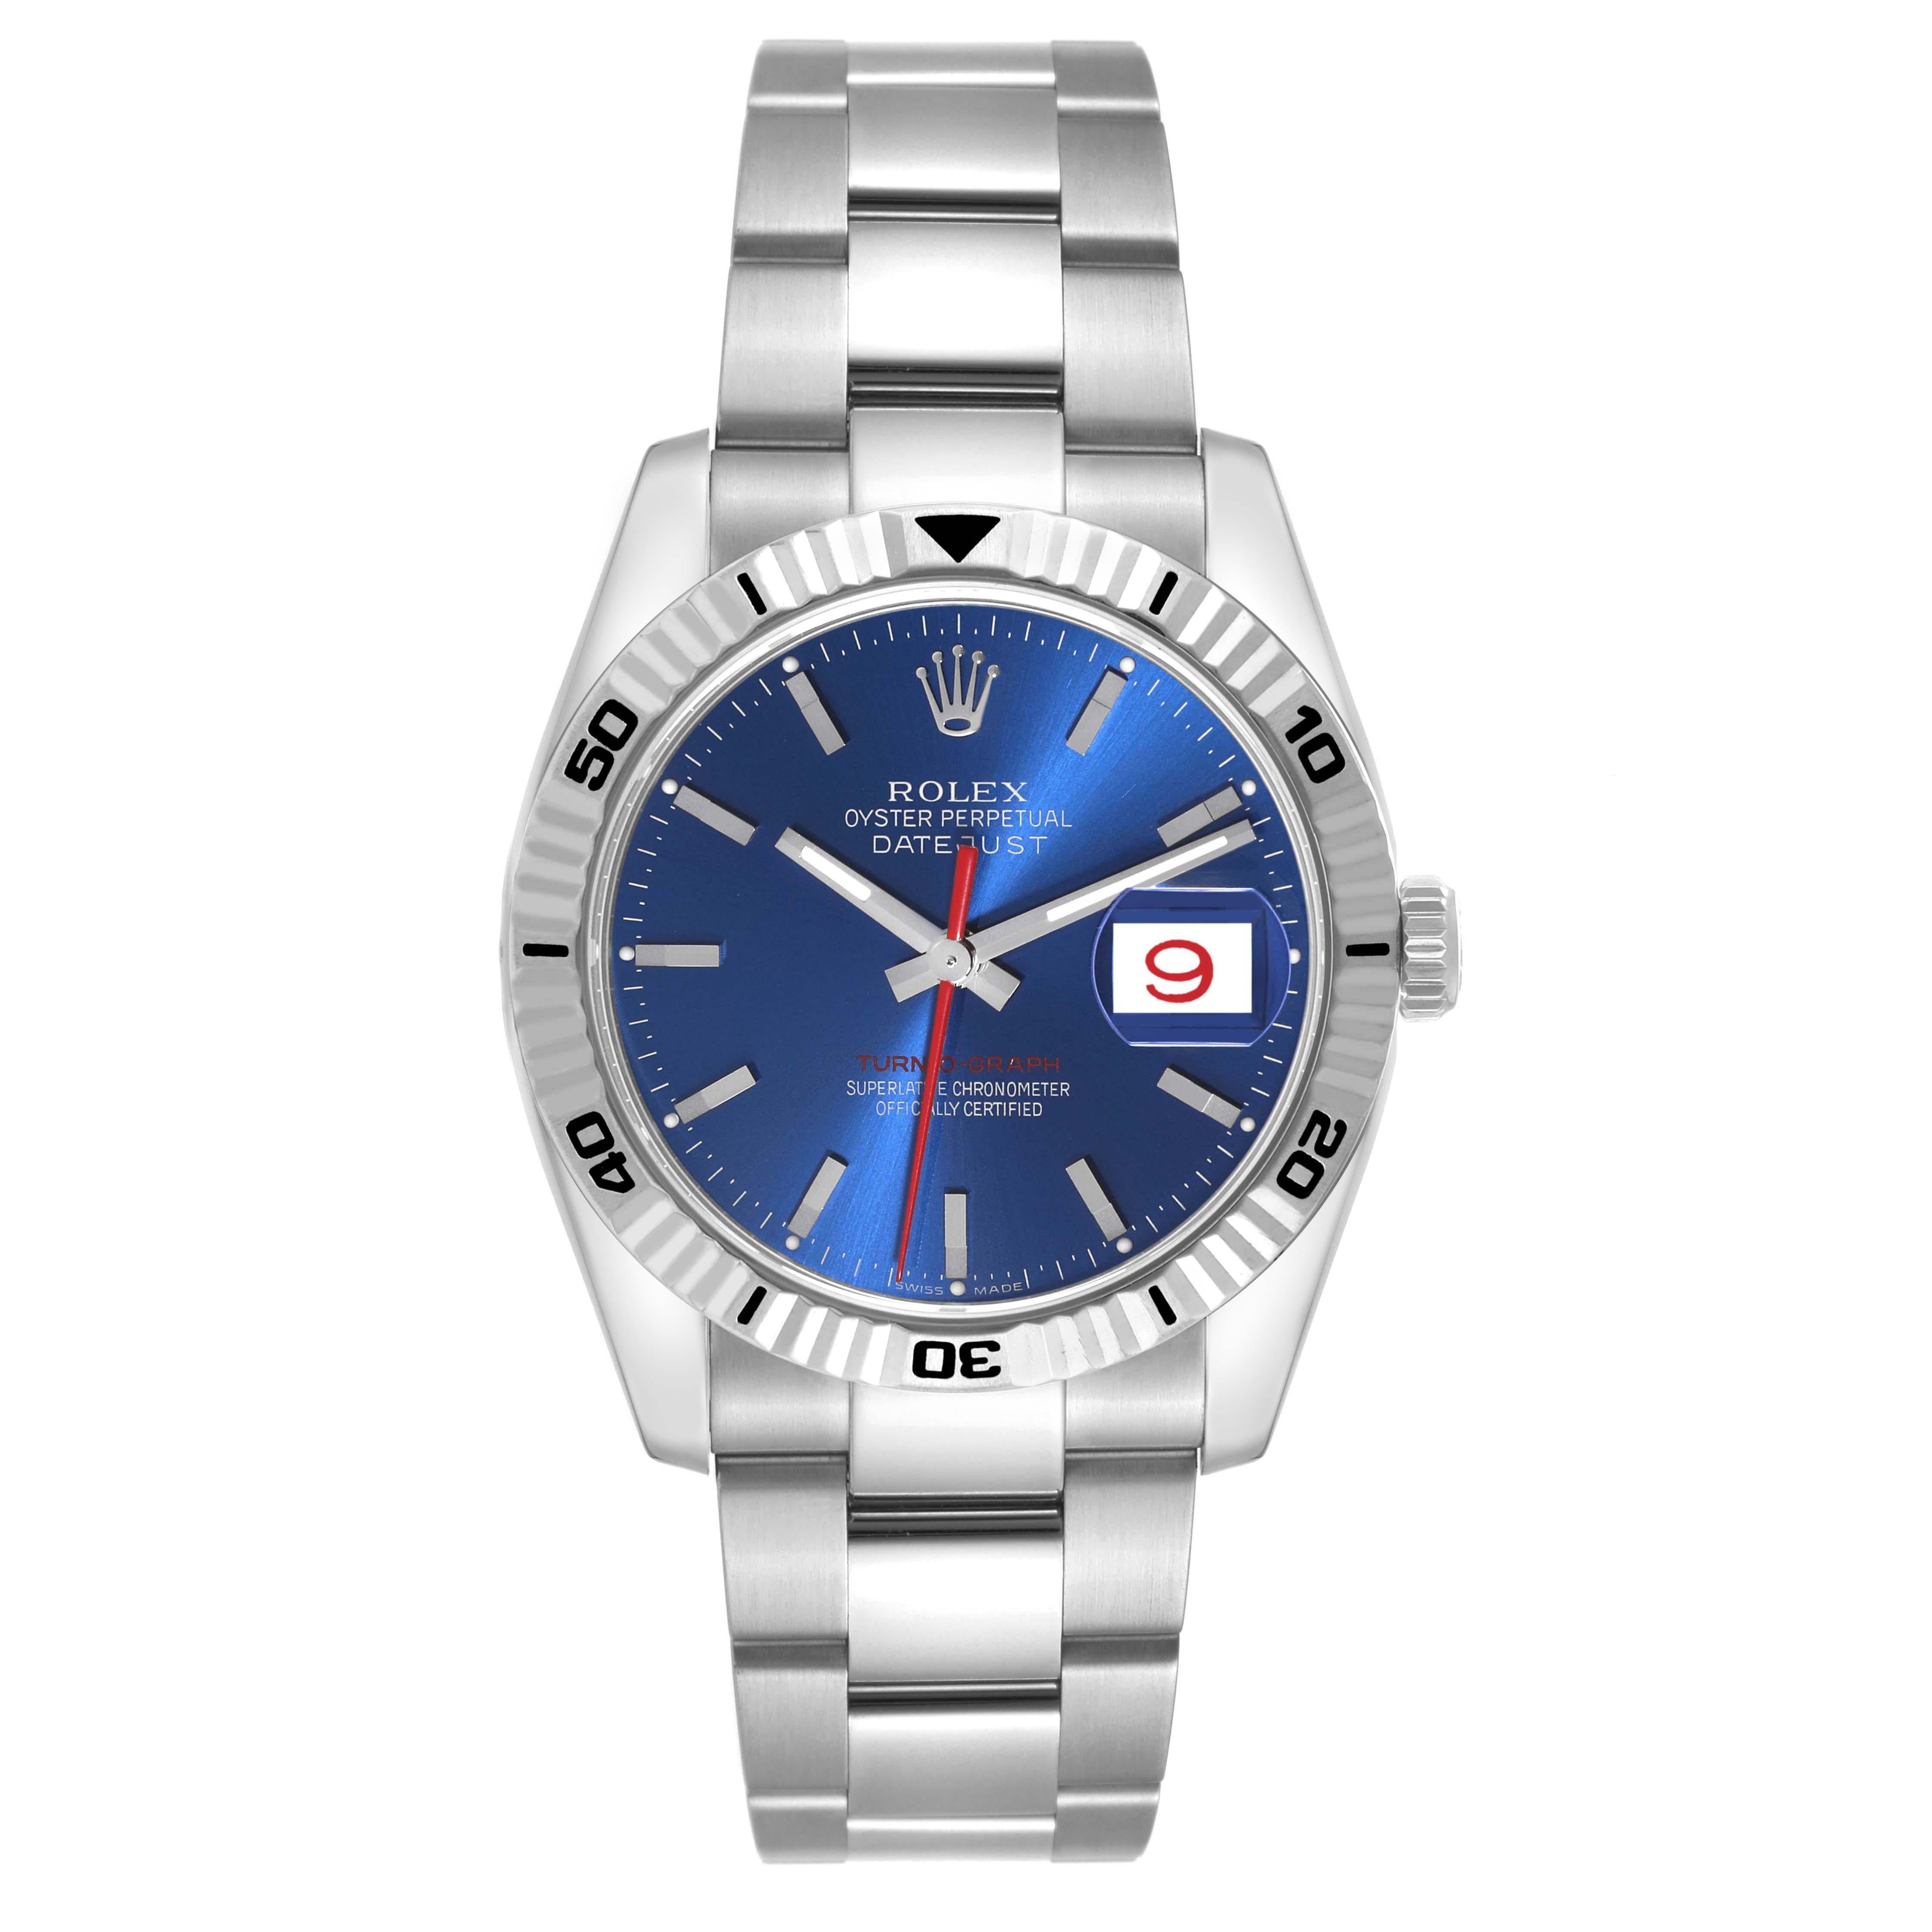 Rolex Datejust Turnograph Steel White Gold Blue Dial Mens Watch 116264. Officially certified chronometer automatic self-winding movement. Stainless steel case 36.0 mm in diameter. Rolex logo on the crown. 18k white gold fluted bidirectional rotating